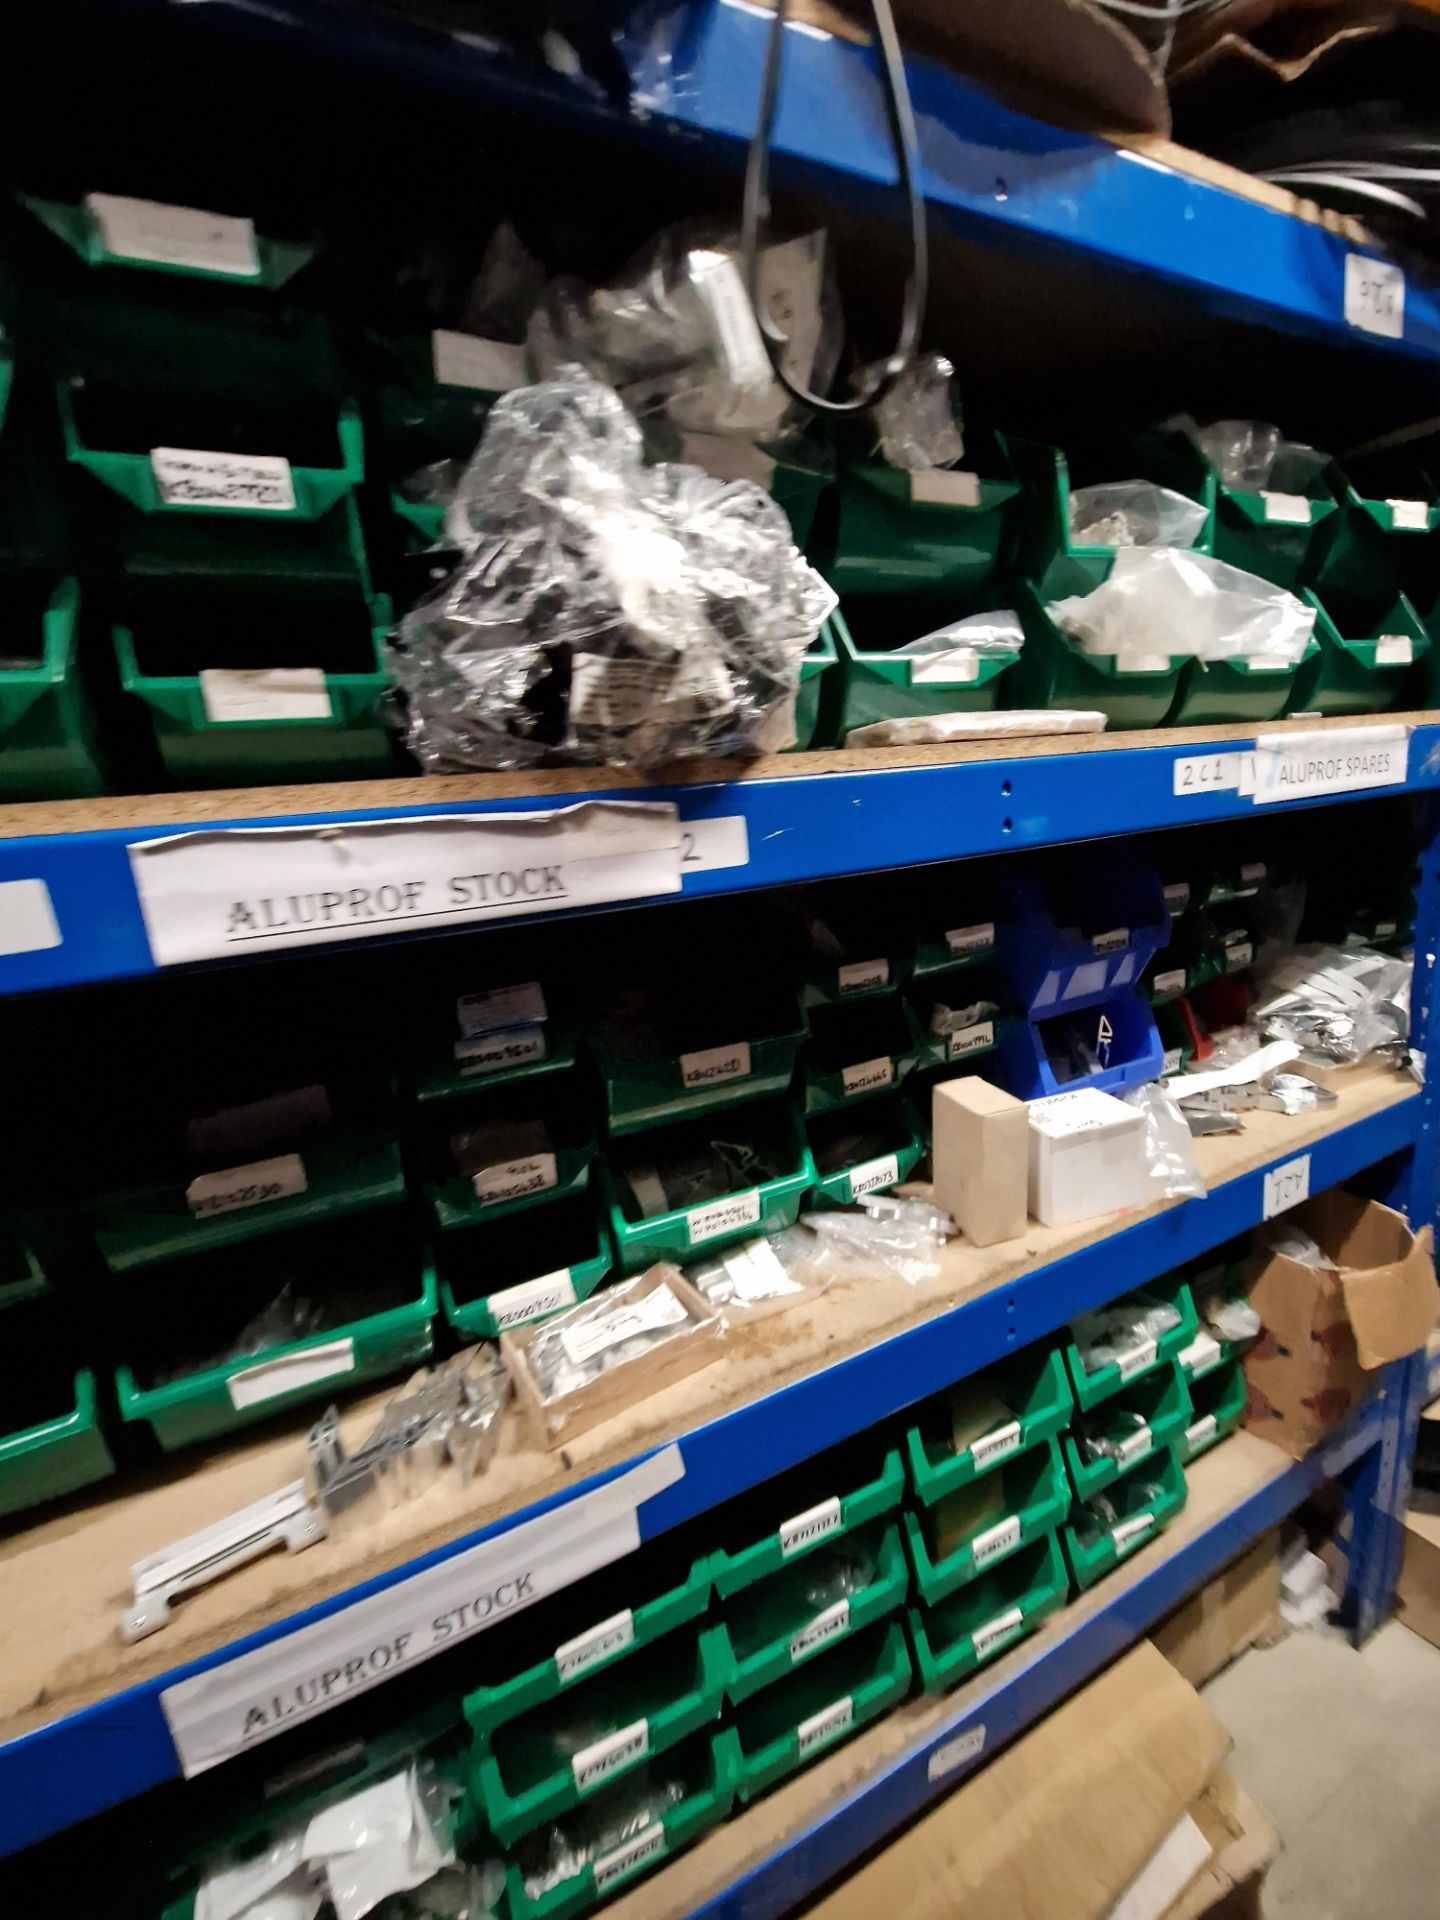 Contents to Four Bays of Shelving, including Rubber Gaskets, Aluminium Profile, End Caps, Screws, - Image 6 of 11